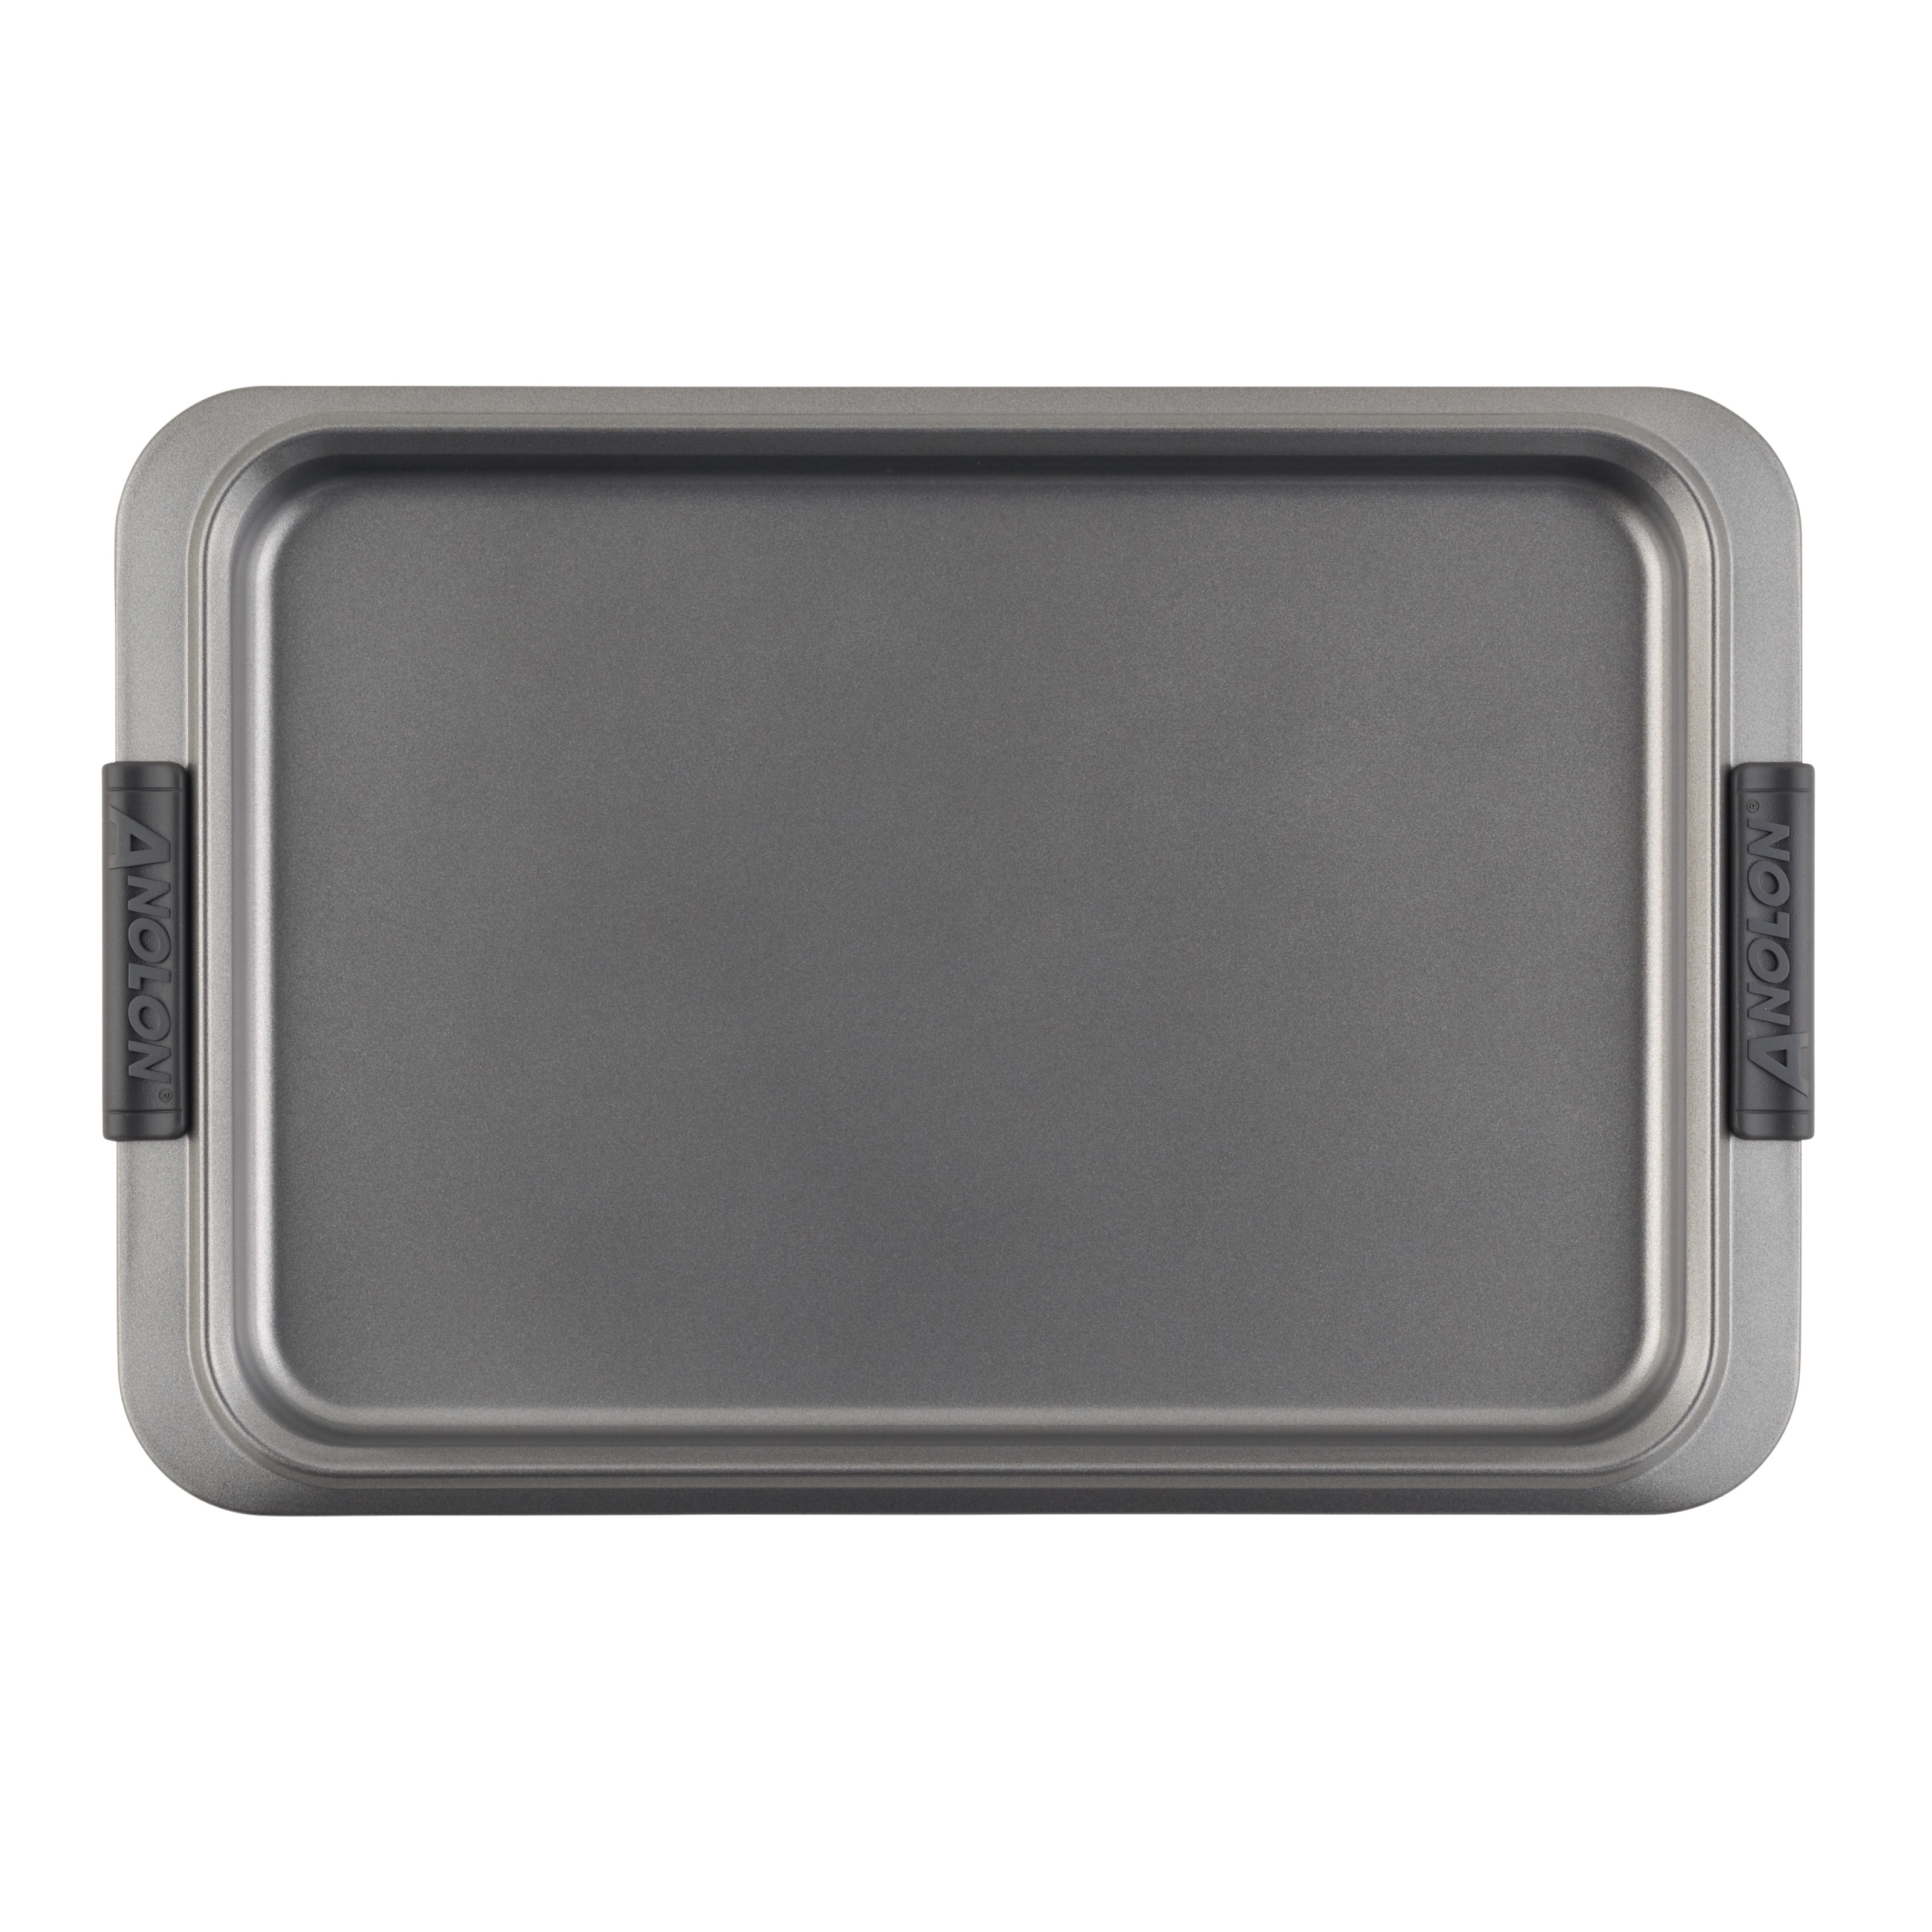 Patisse - Perforated baking sheet non-stick - Silver Top